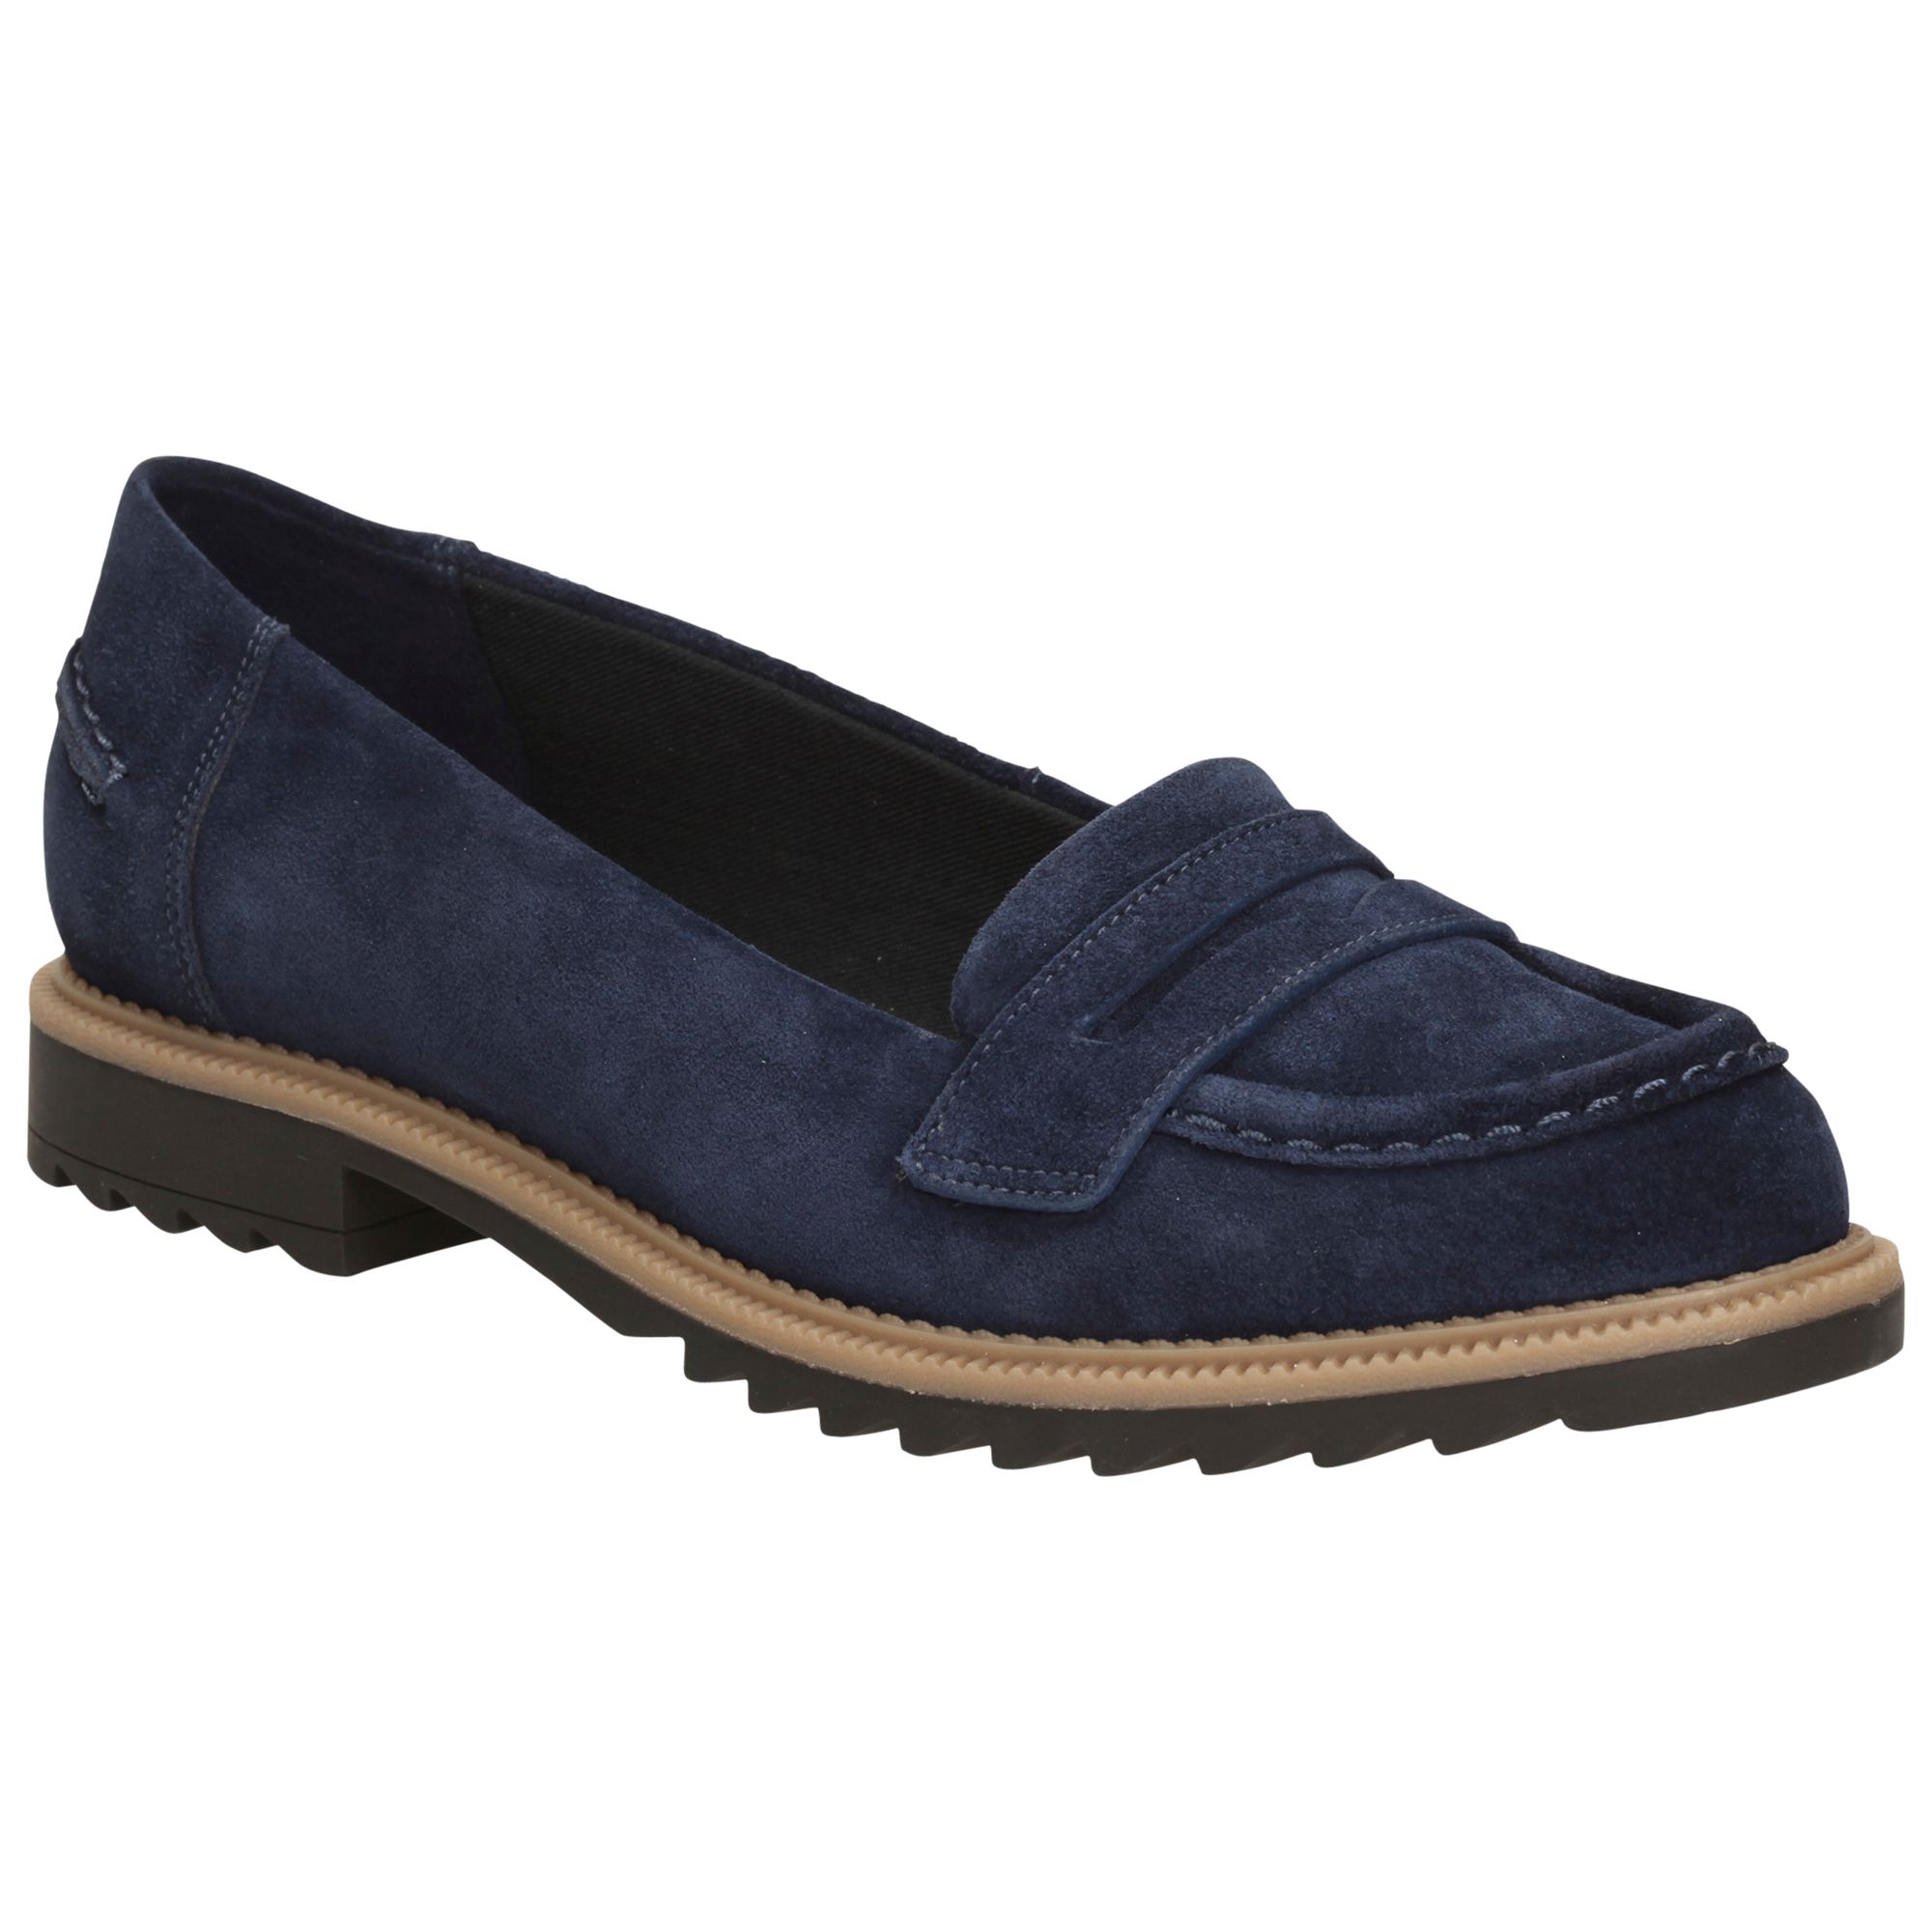 clarks navy loafers off 72% - online-sms.in